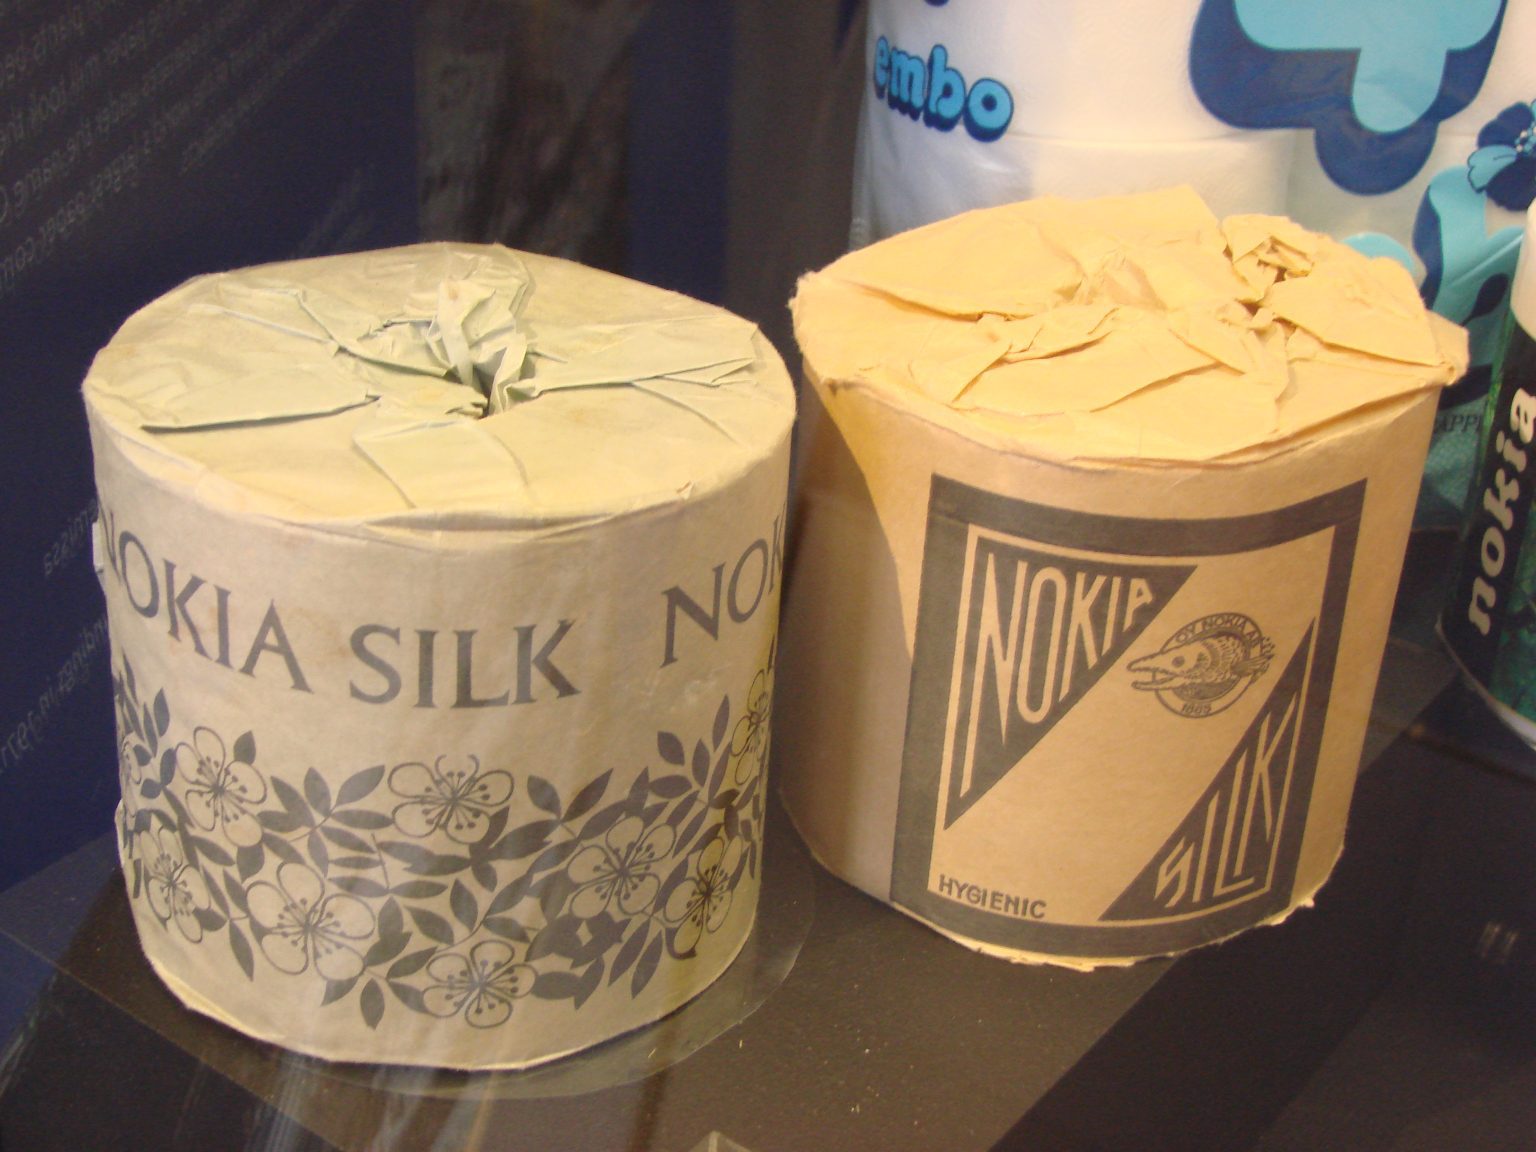 Nokia-Toilet-Paper-Sony-Rice-Cooker-First-Products-Of-Famous-Brands-And-Companies-1536x1152.jpg